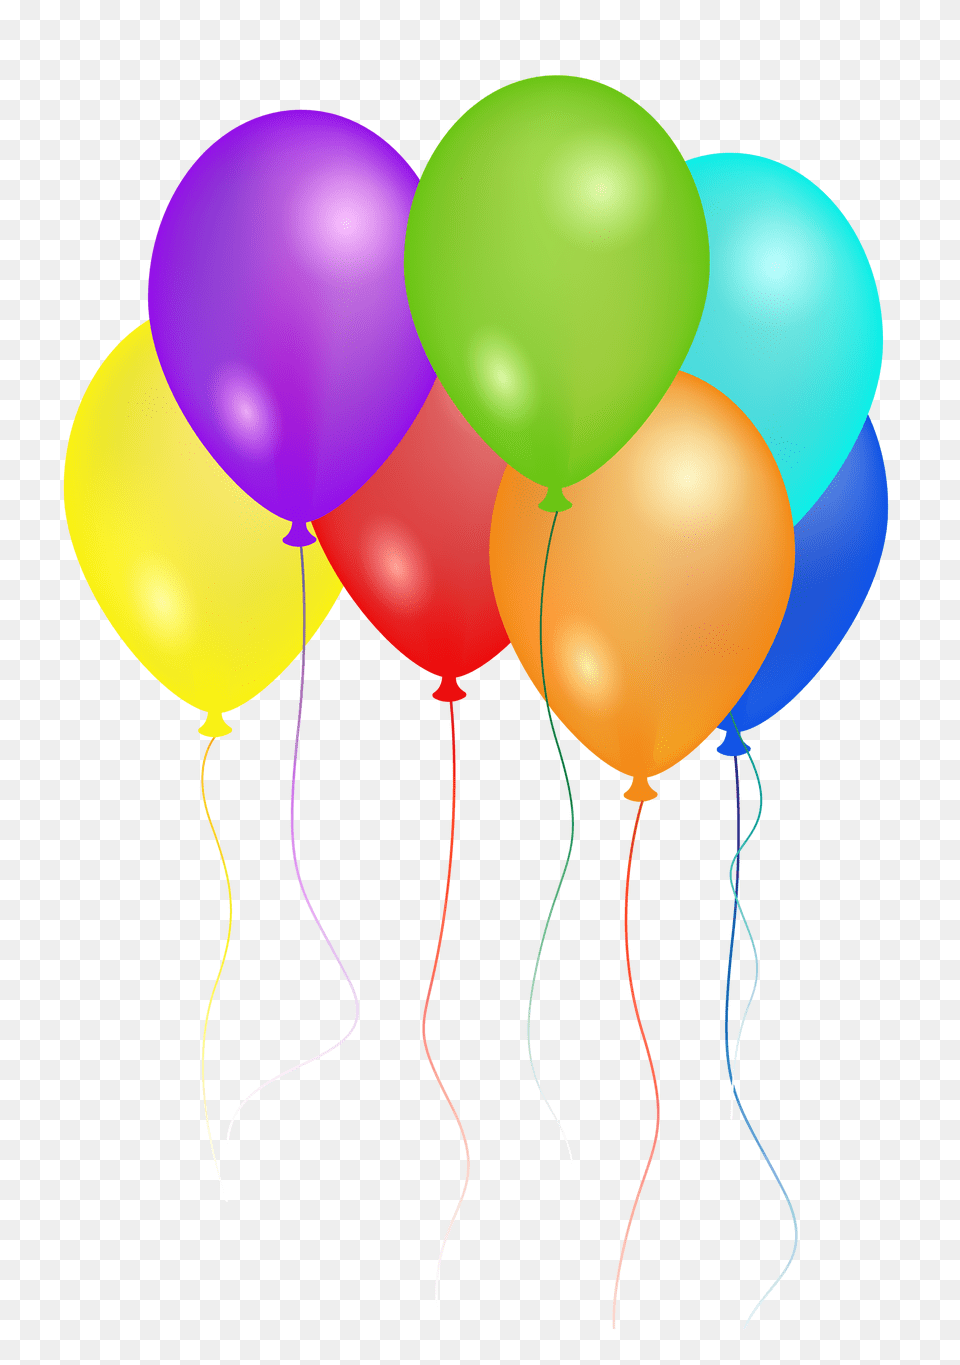 Pngpix Com Birthday Party Balloons Image, Balloon Png